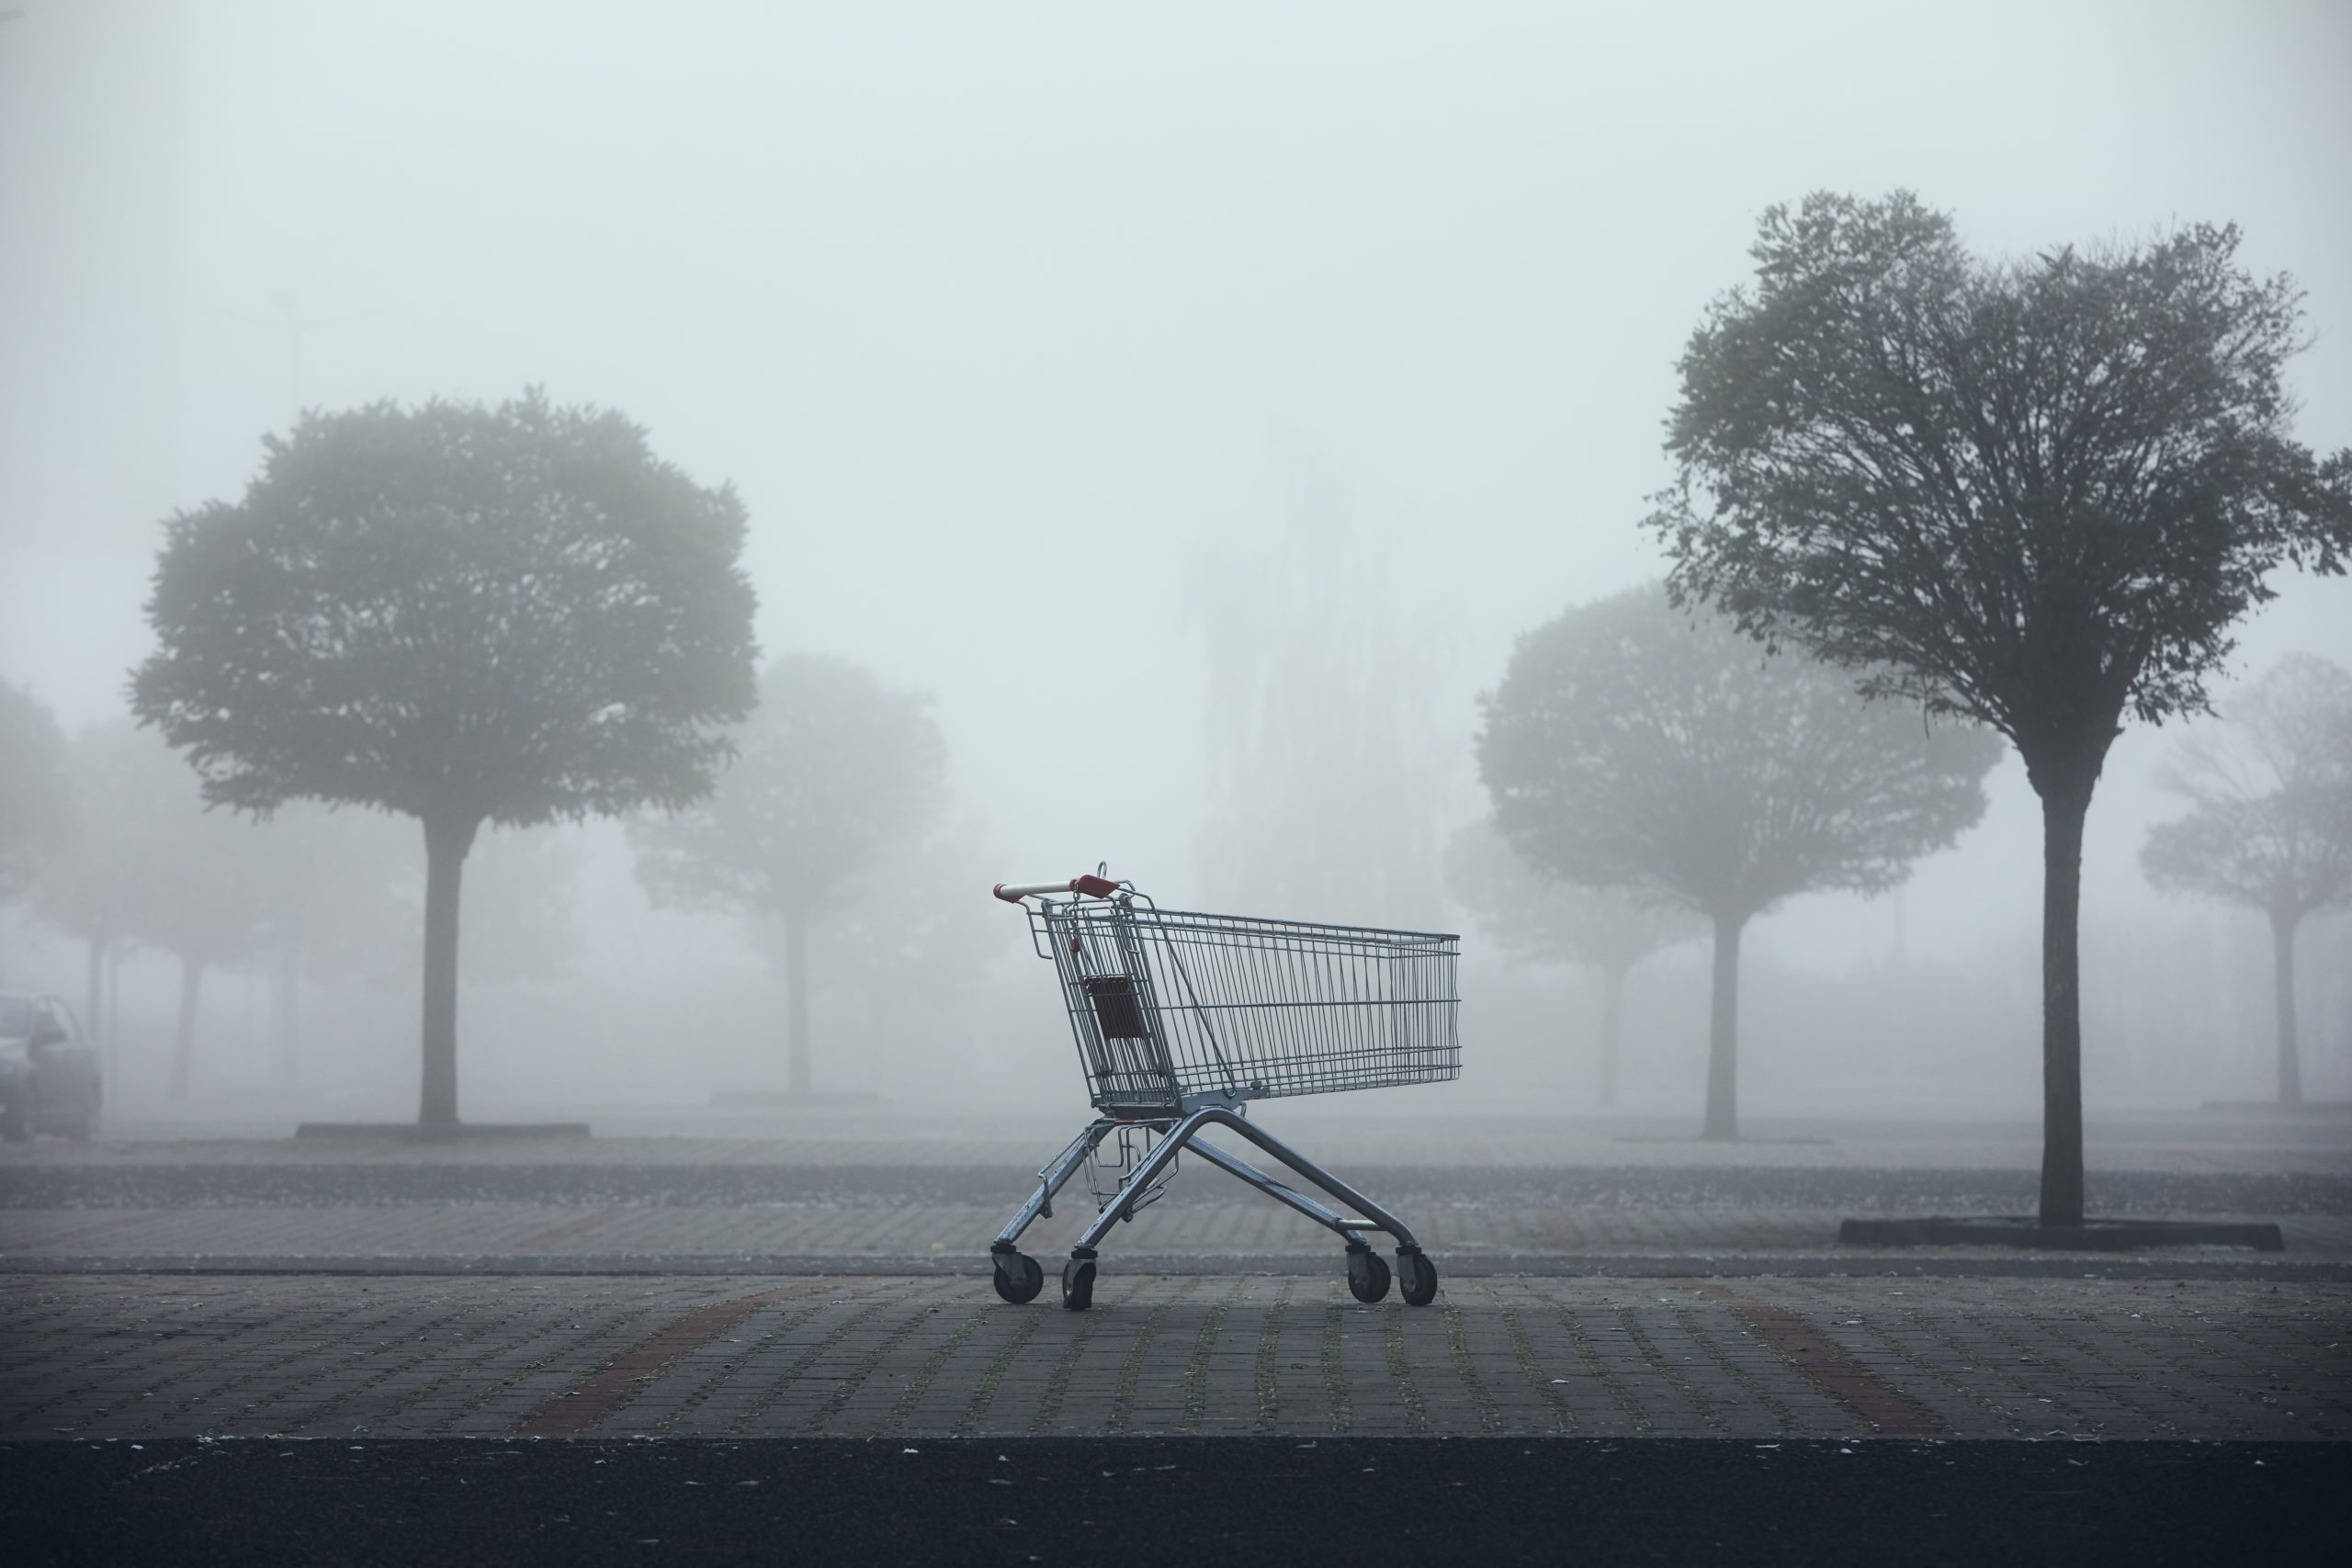 Abandoned shopping cart on parking lot in thick fog.